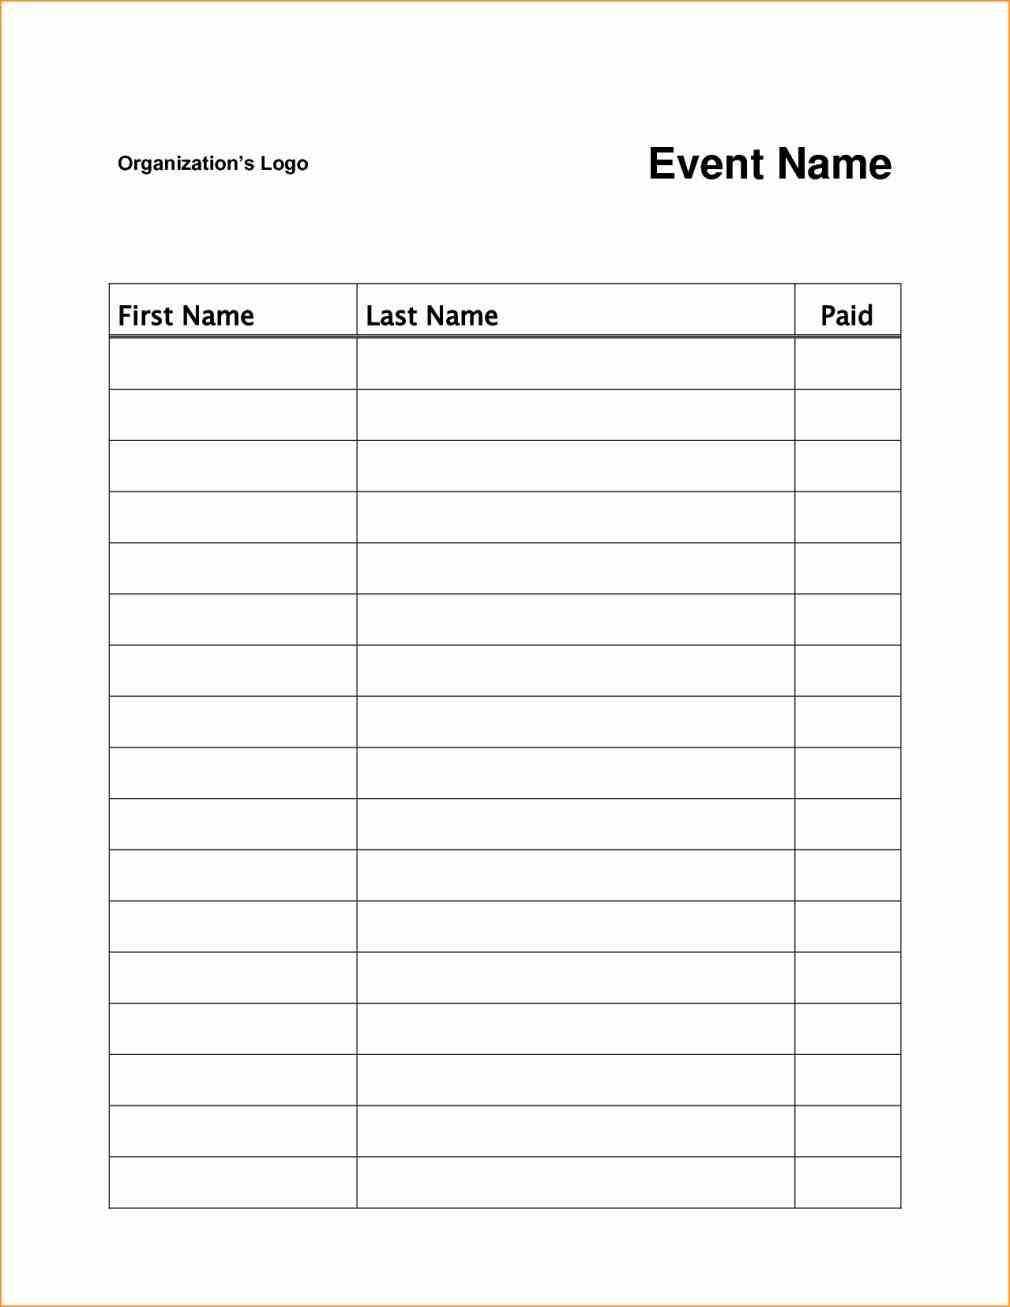 Event Or Class Workshop Forms A Sign Up Sheet Template Word Throughout Free Sign Up Sheet Template Word